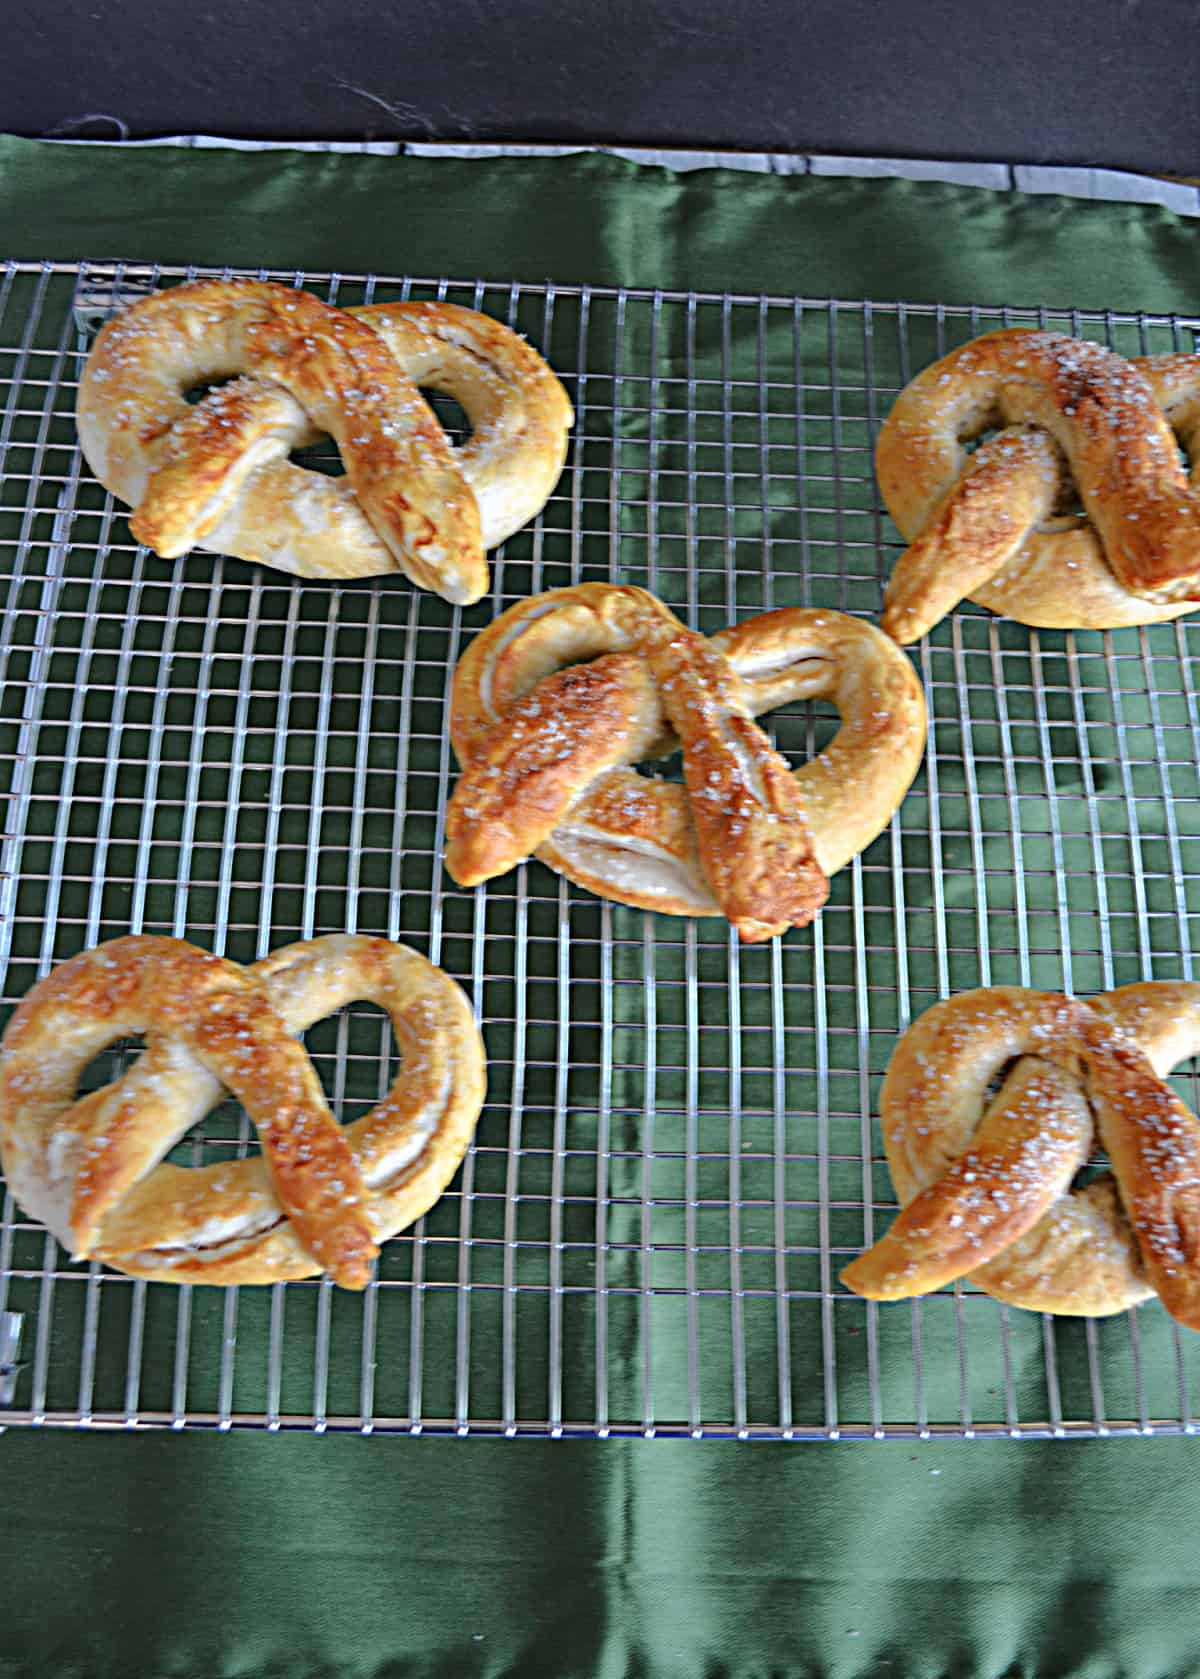 Here's a substitute for lye when making pretzels at home